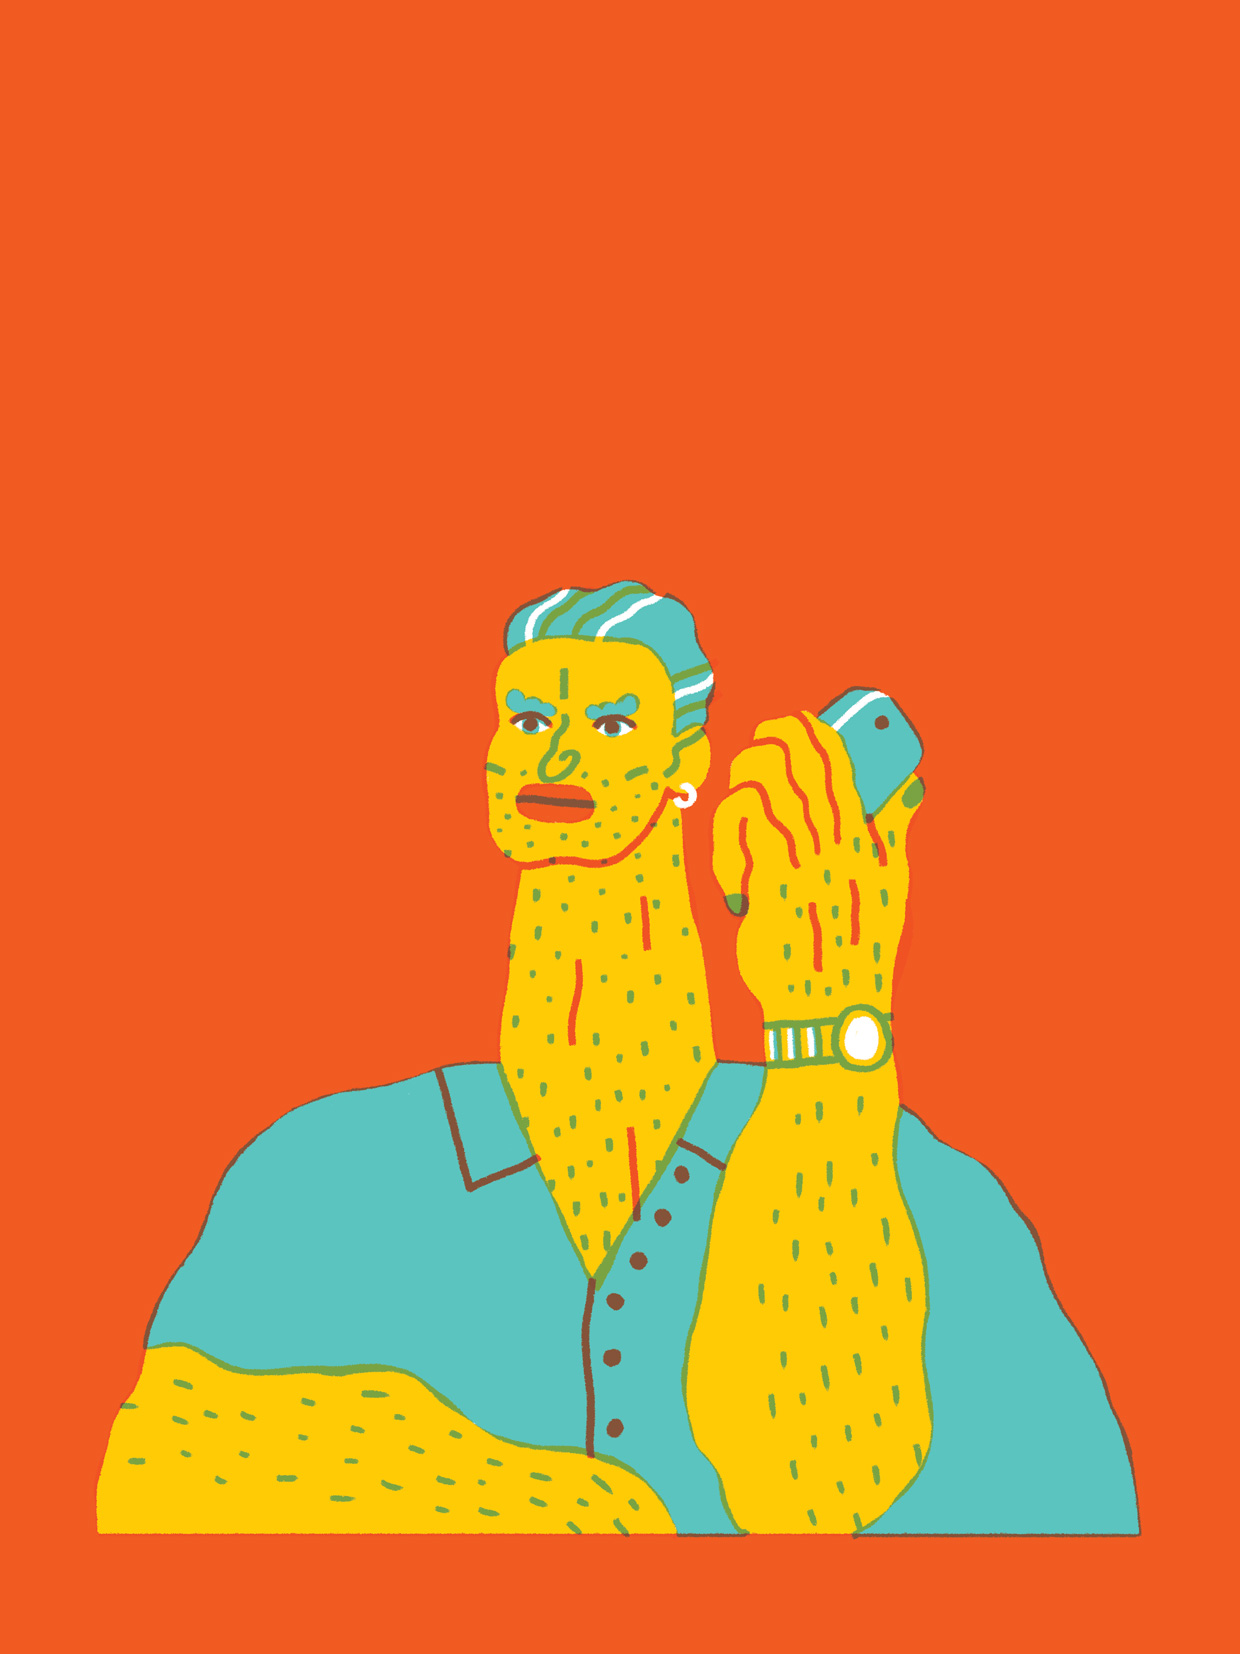 A drawing of a long-necked man using a mobile phone.